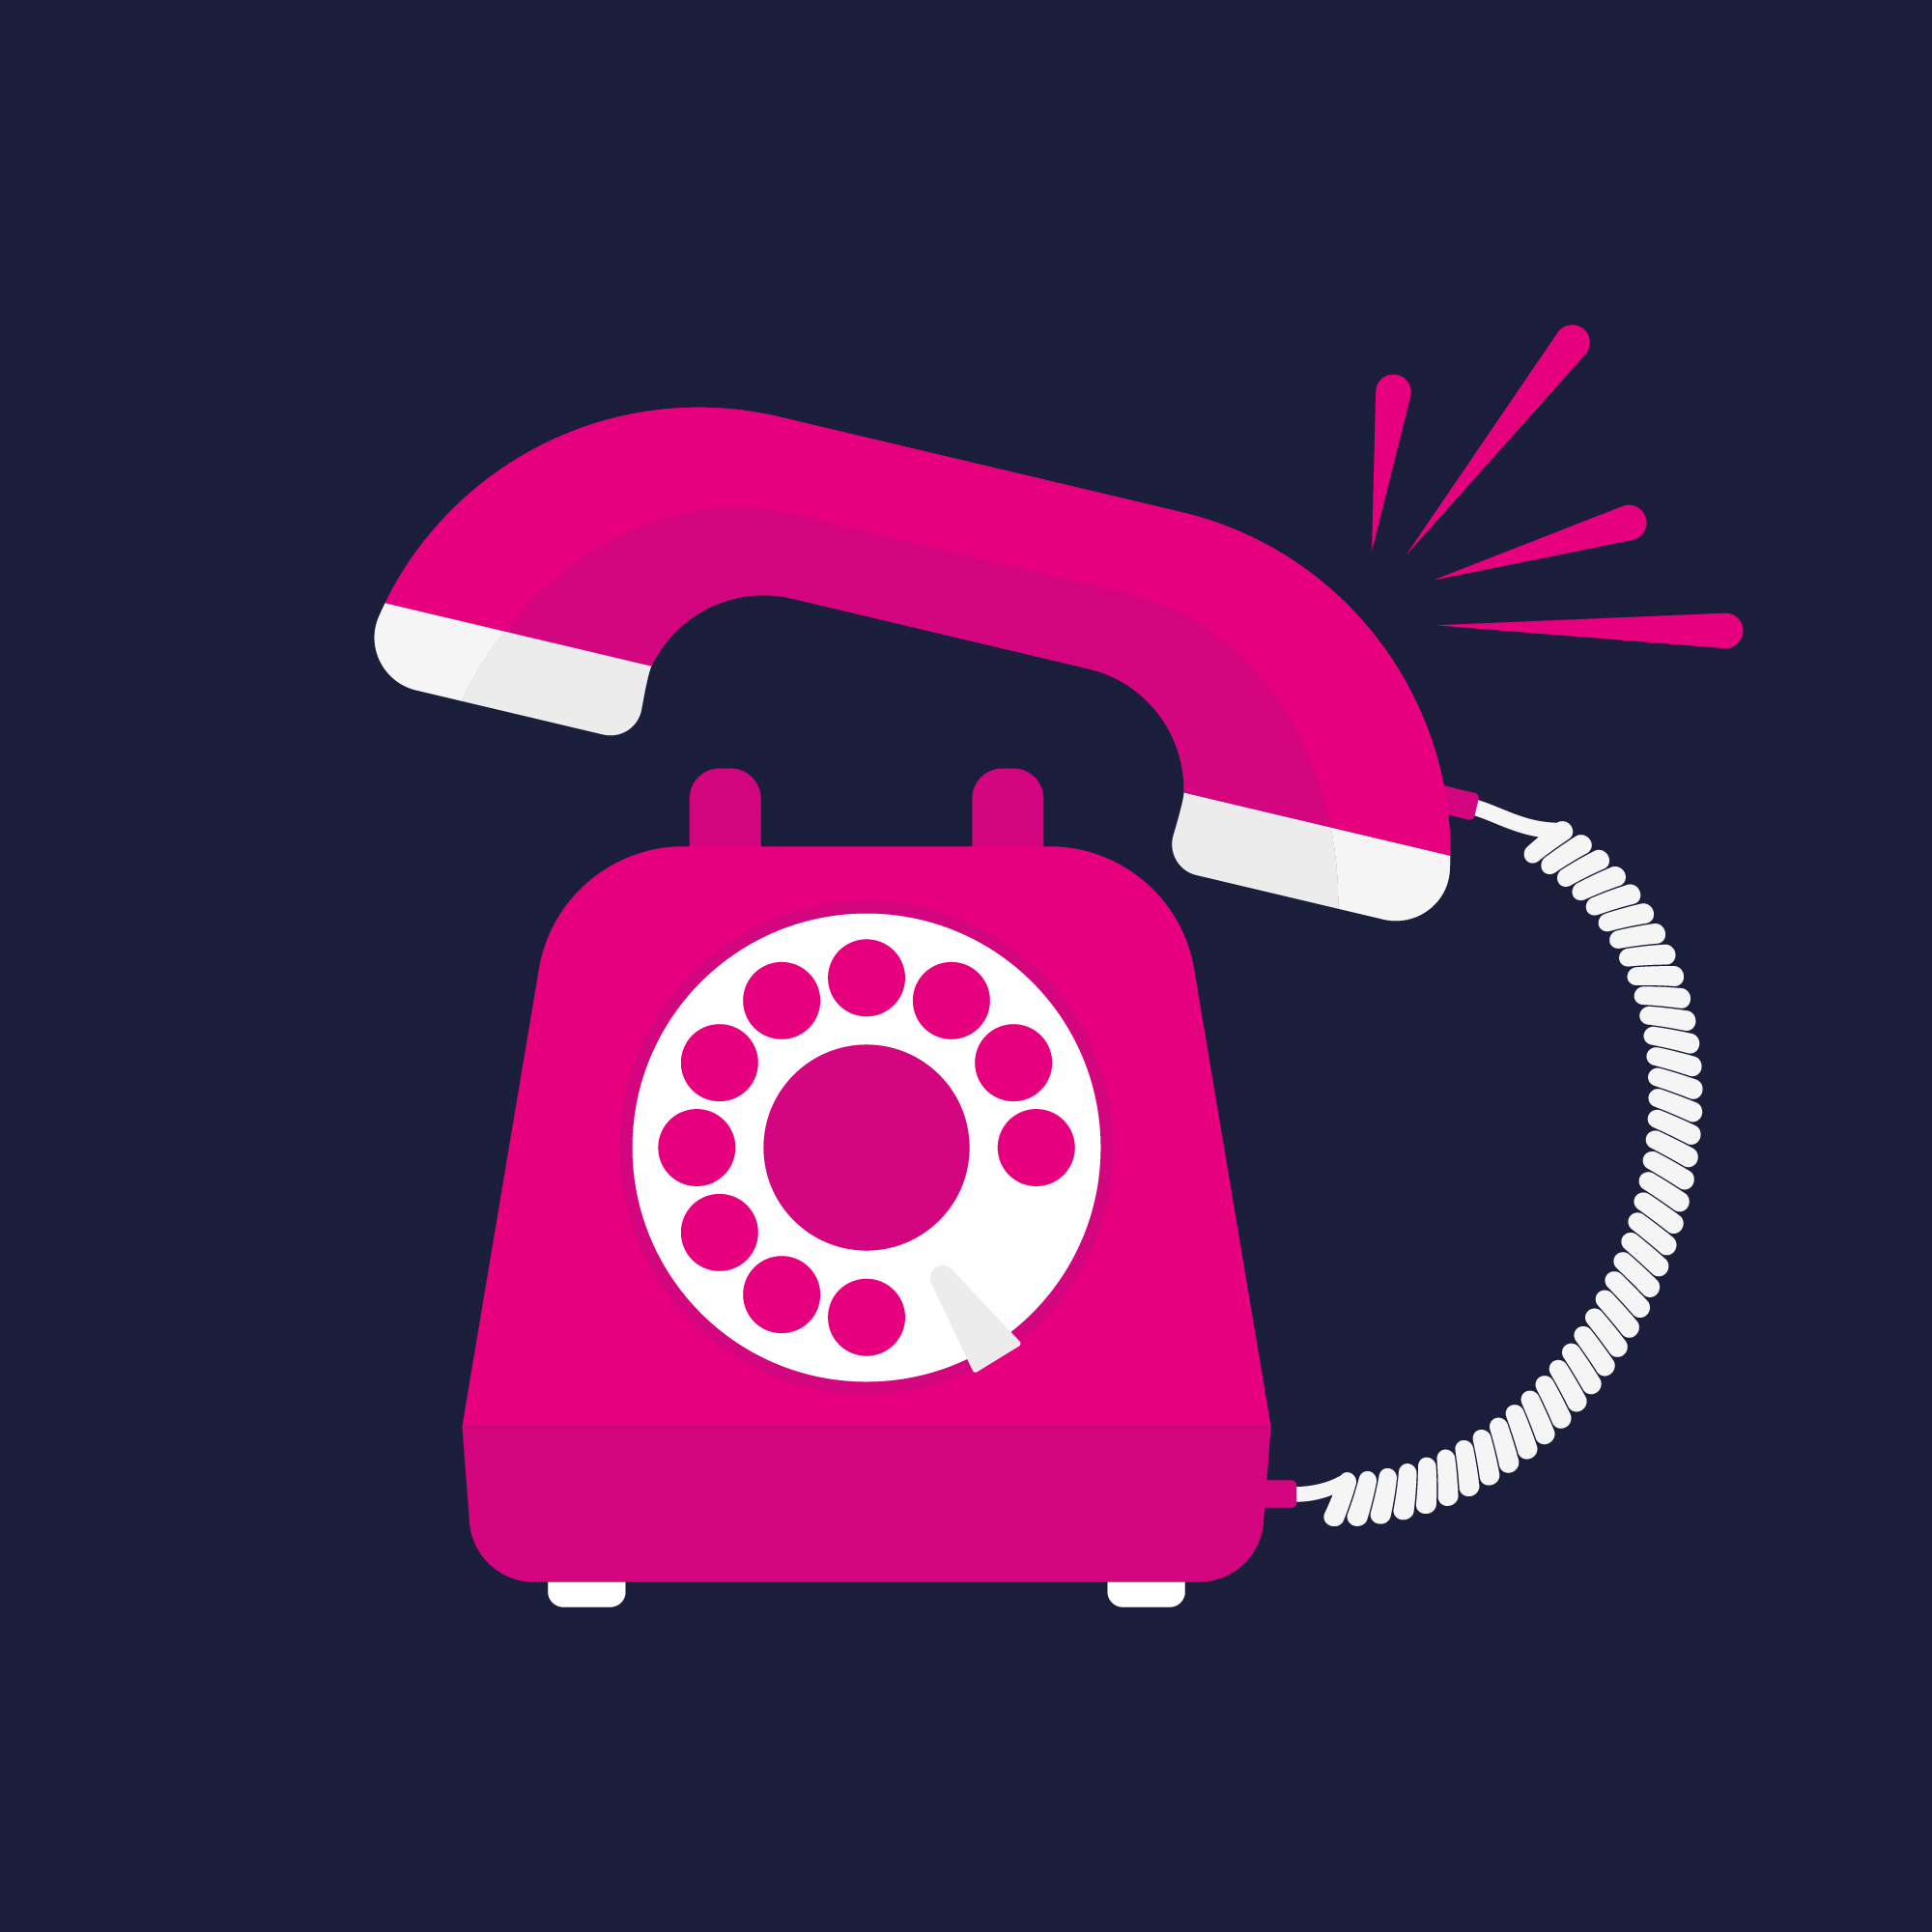 Call Ads: Encourage Customers to Pick up the Phone